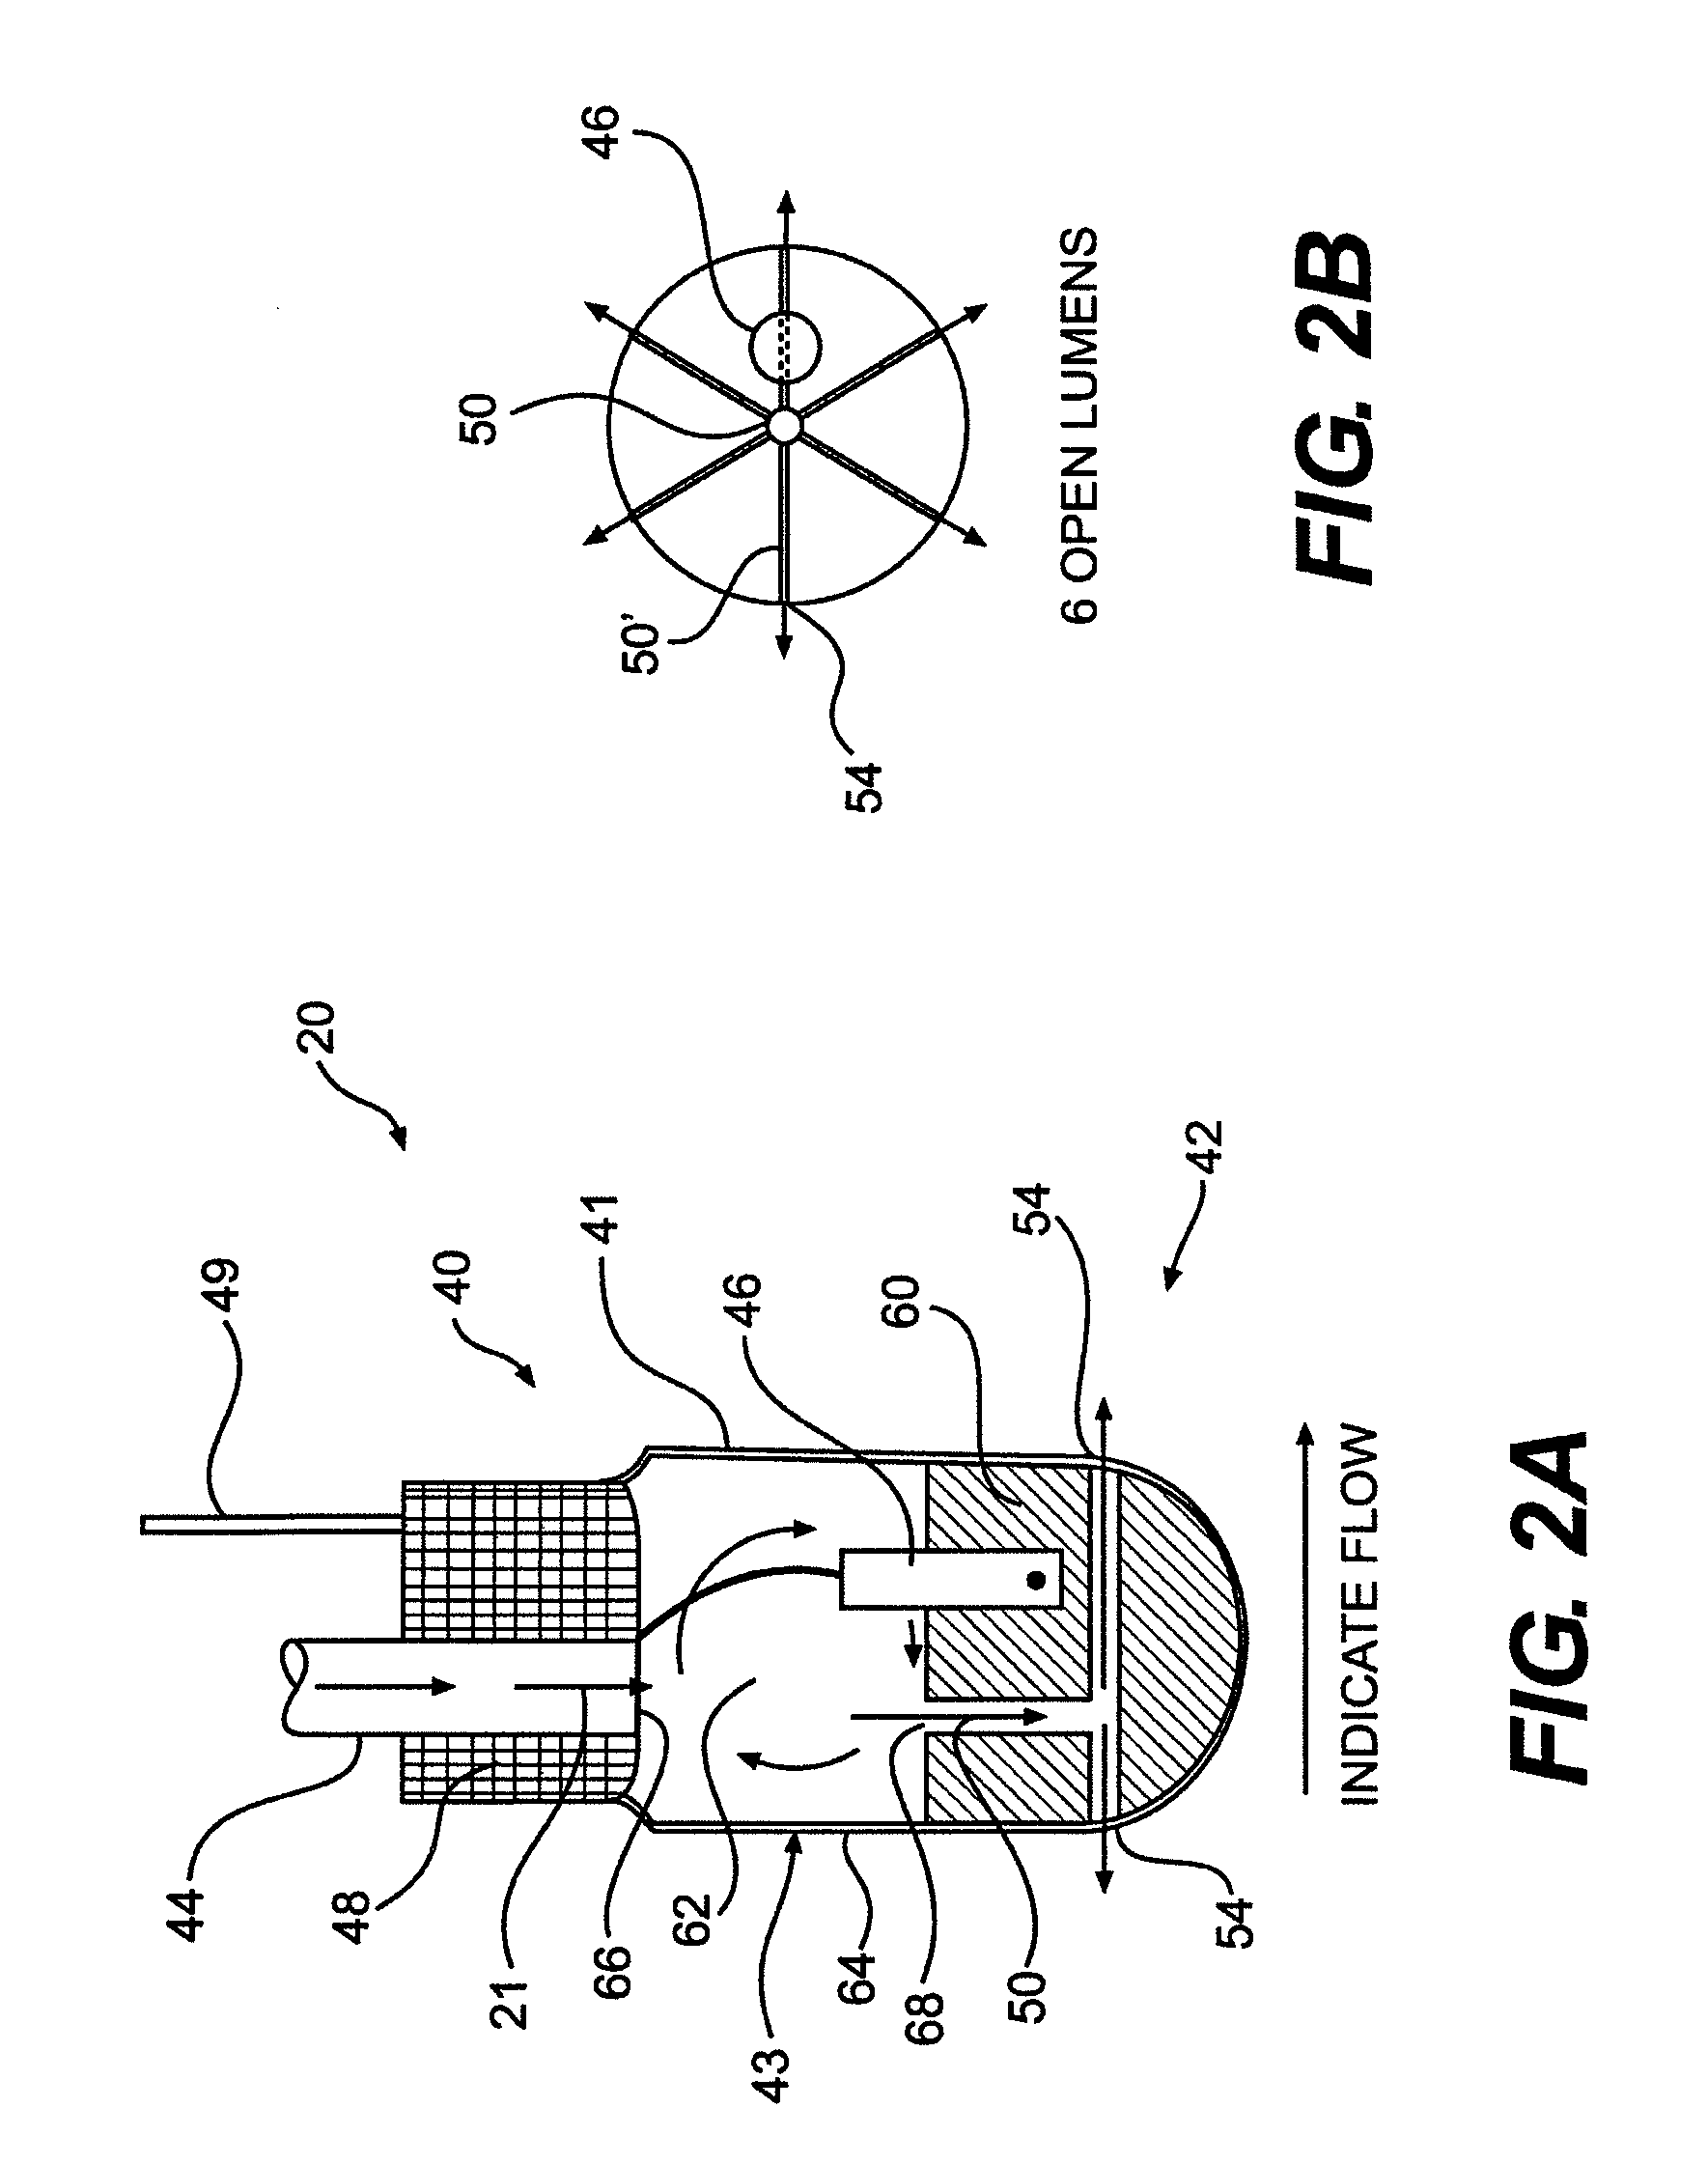 Cooled ablation catheter devices and methods of use